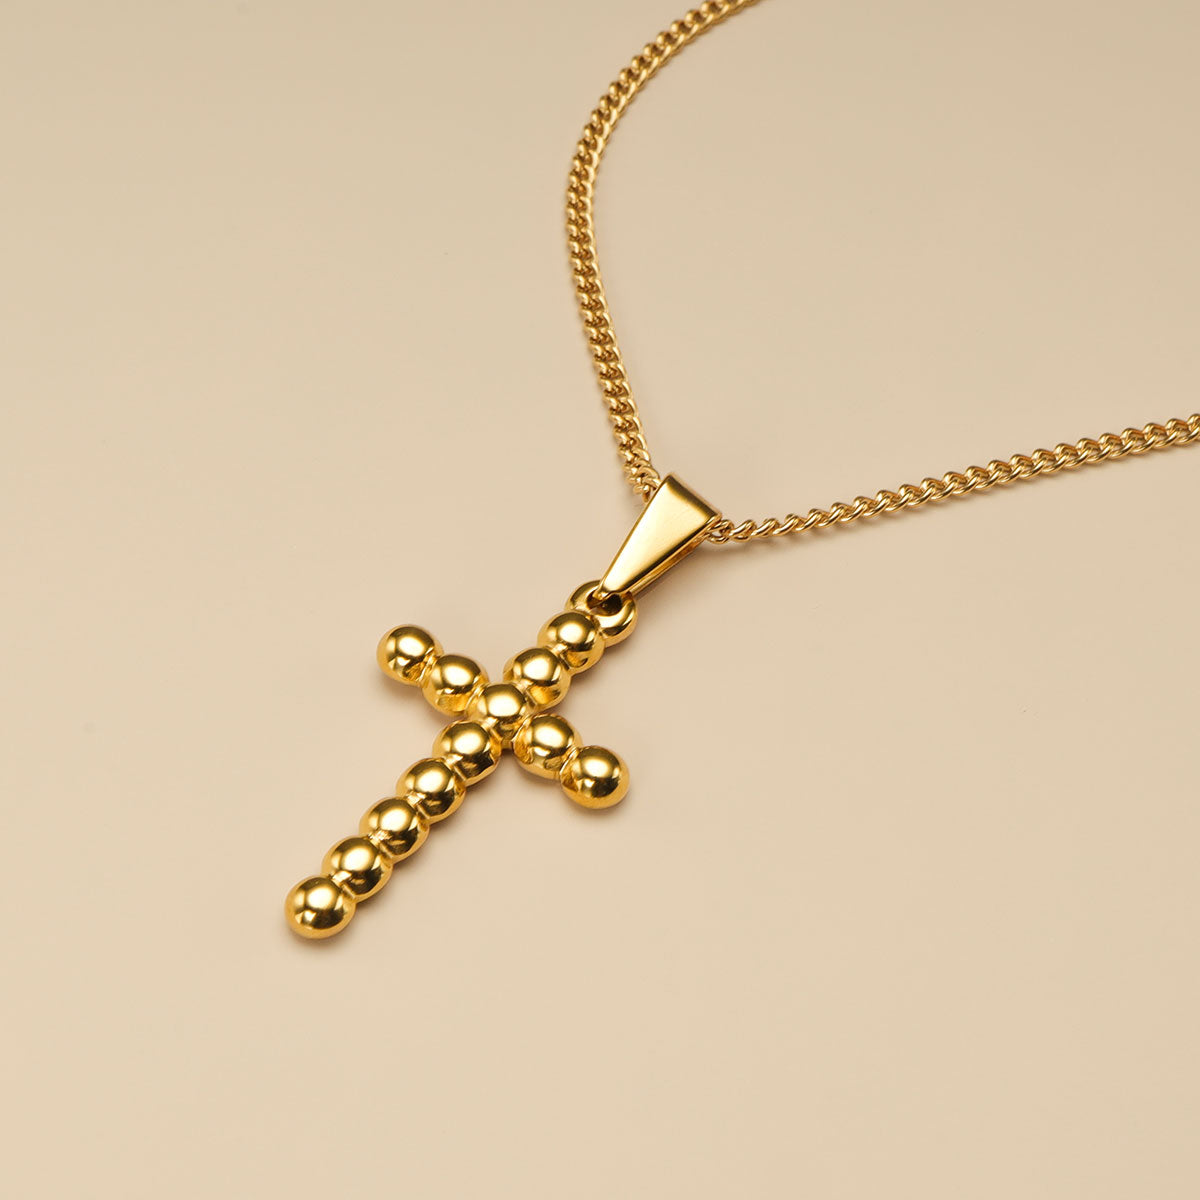 The close shot of cross pendant necklace.